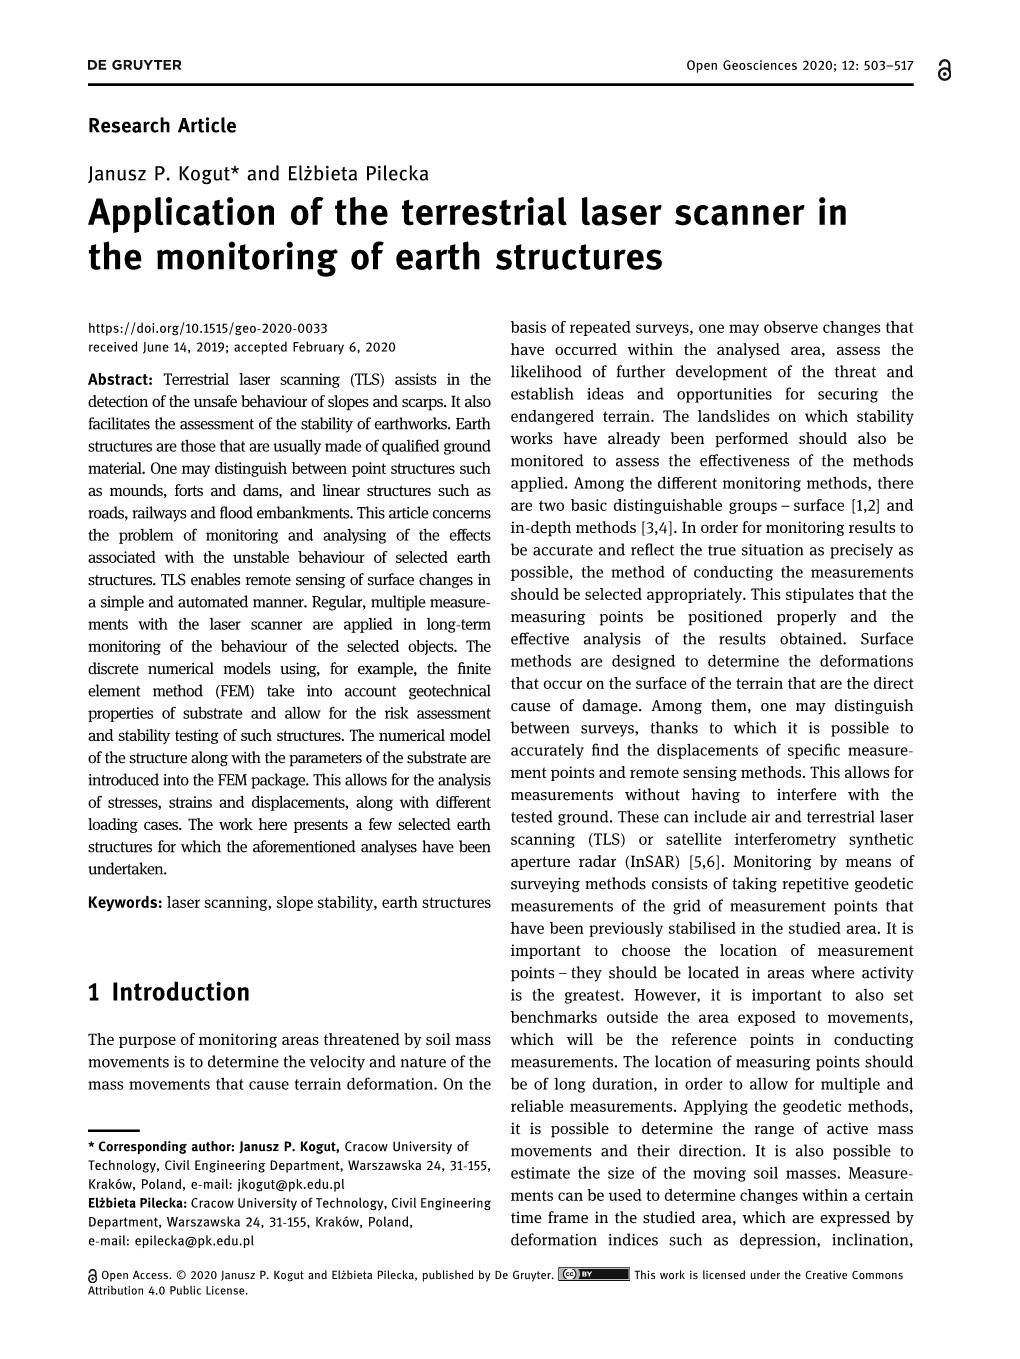 Application of the Terrestrial Laser Scanner in the Monitoring of Earth Structures